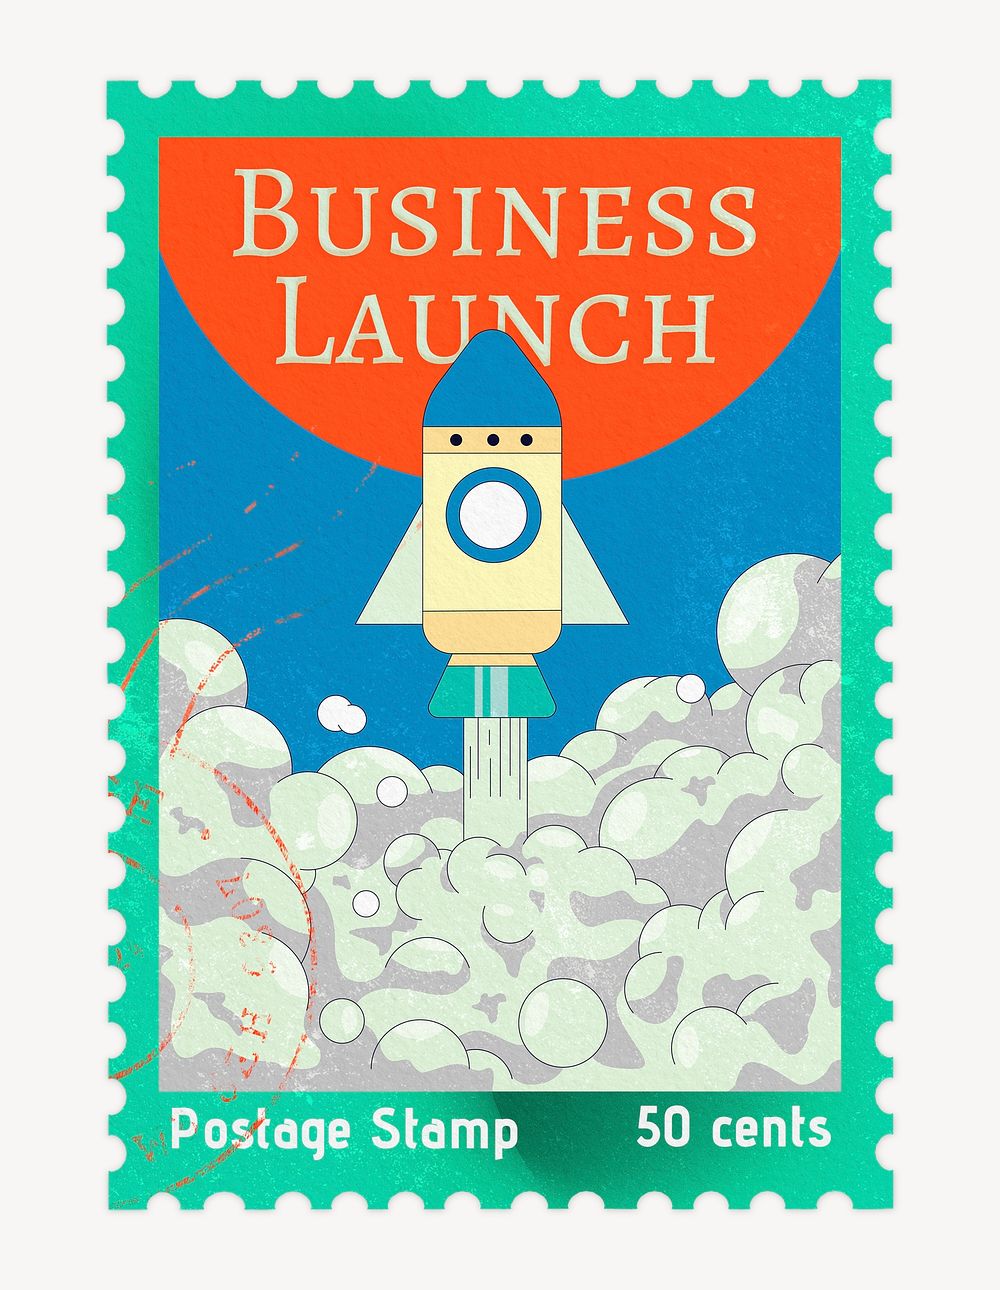 Business launch postage stamp, stationery collage element